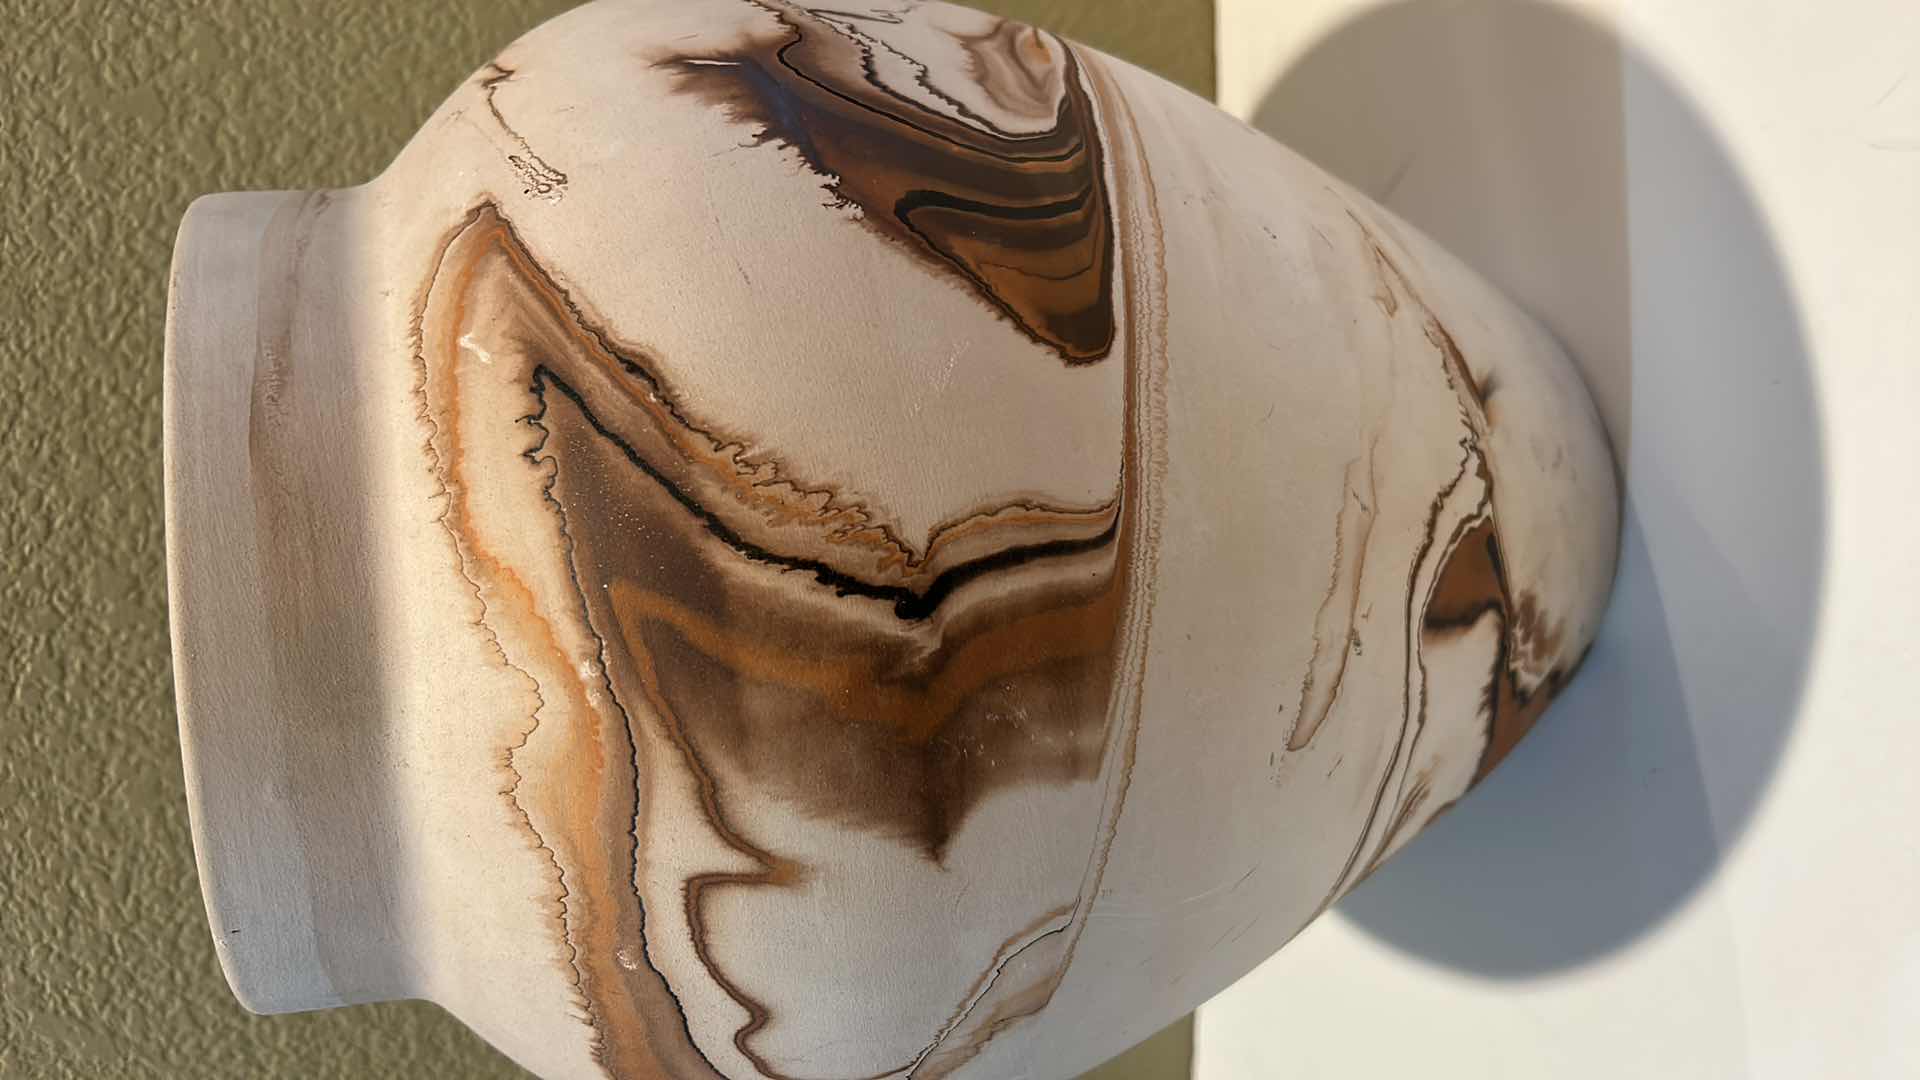 Photo 2 of NEMADJI EARTH POTTERY HAND MADE VASE- MADE FROM 25 THOUSAND YEAR OLD RETREATING GLACIERS